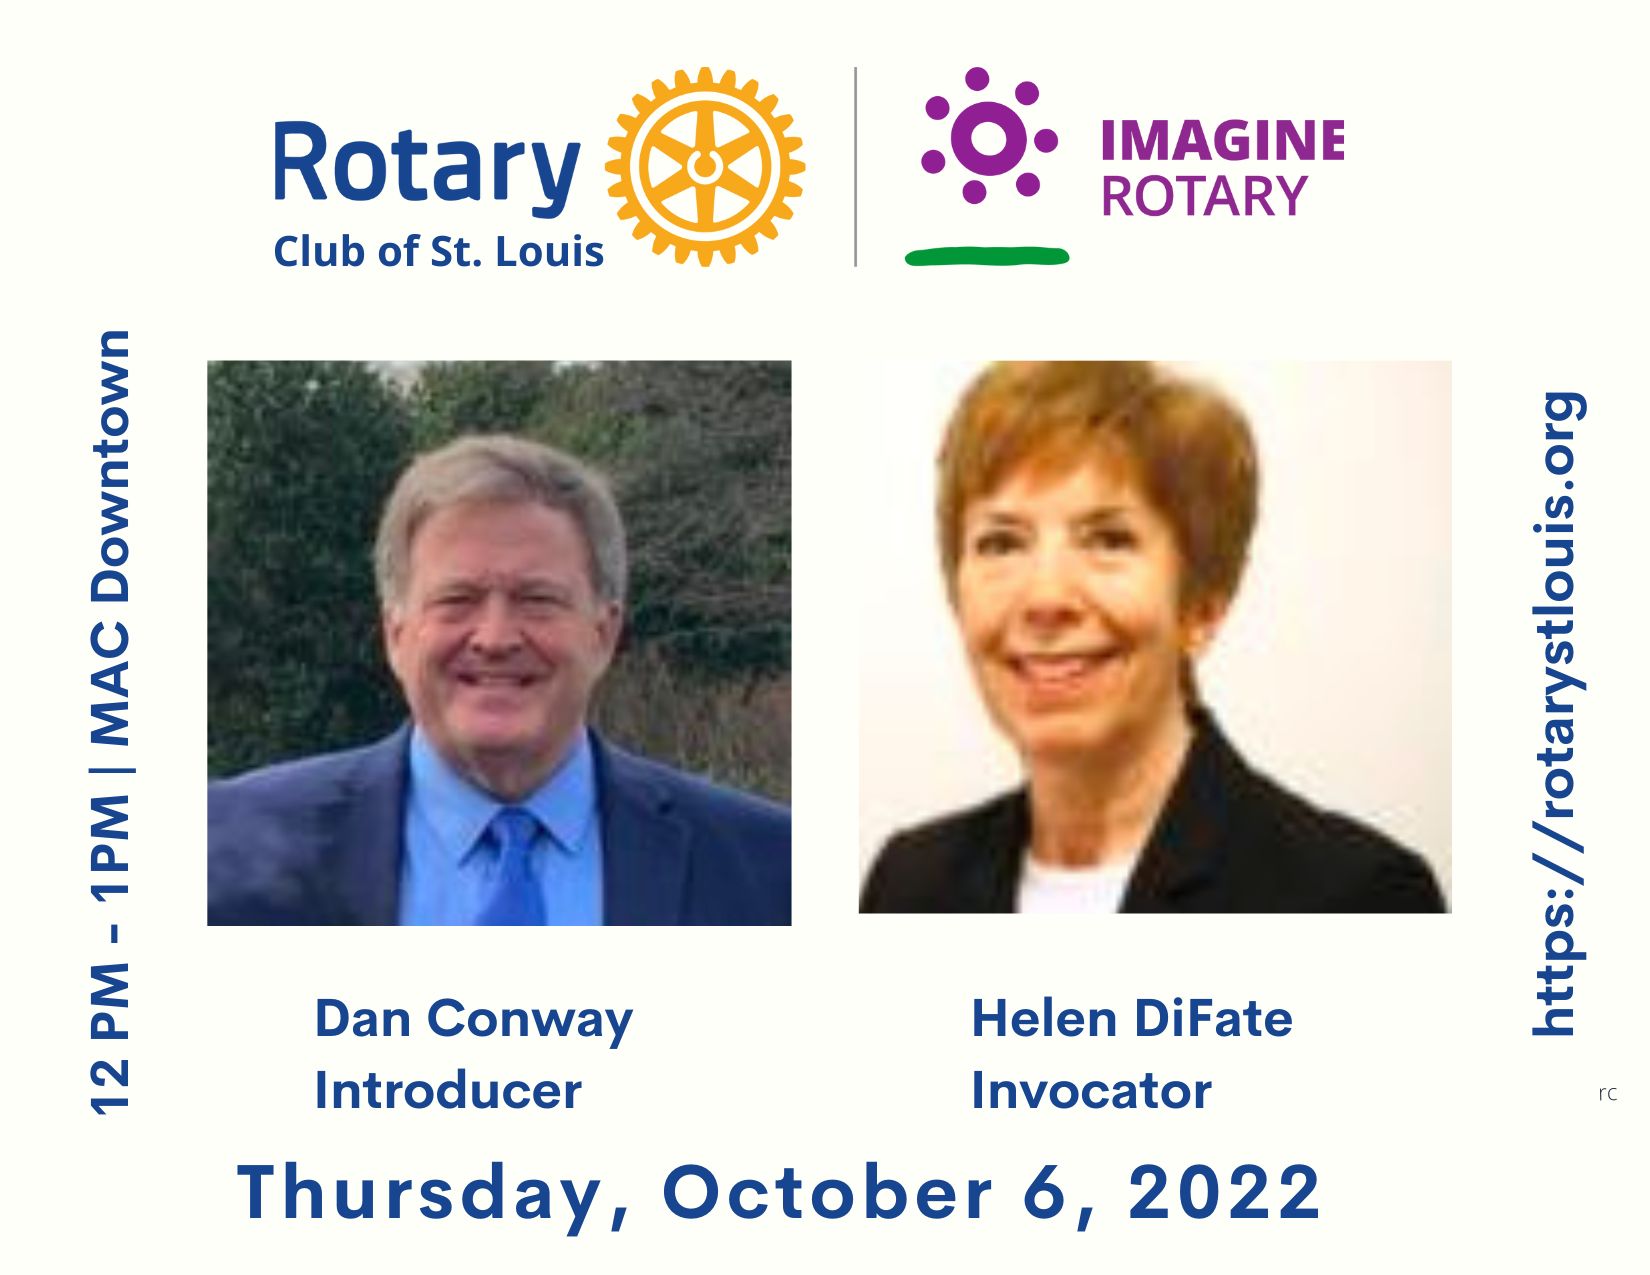 Dan Conway, Introducer & Helen DiFate, Invocator @ STL Rotary 10-6-22